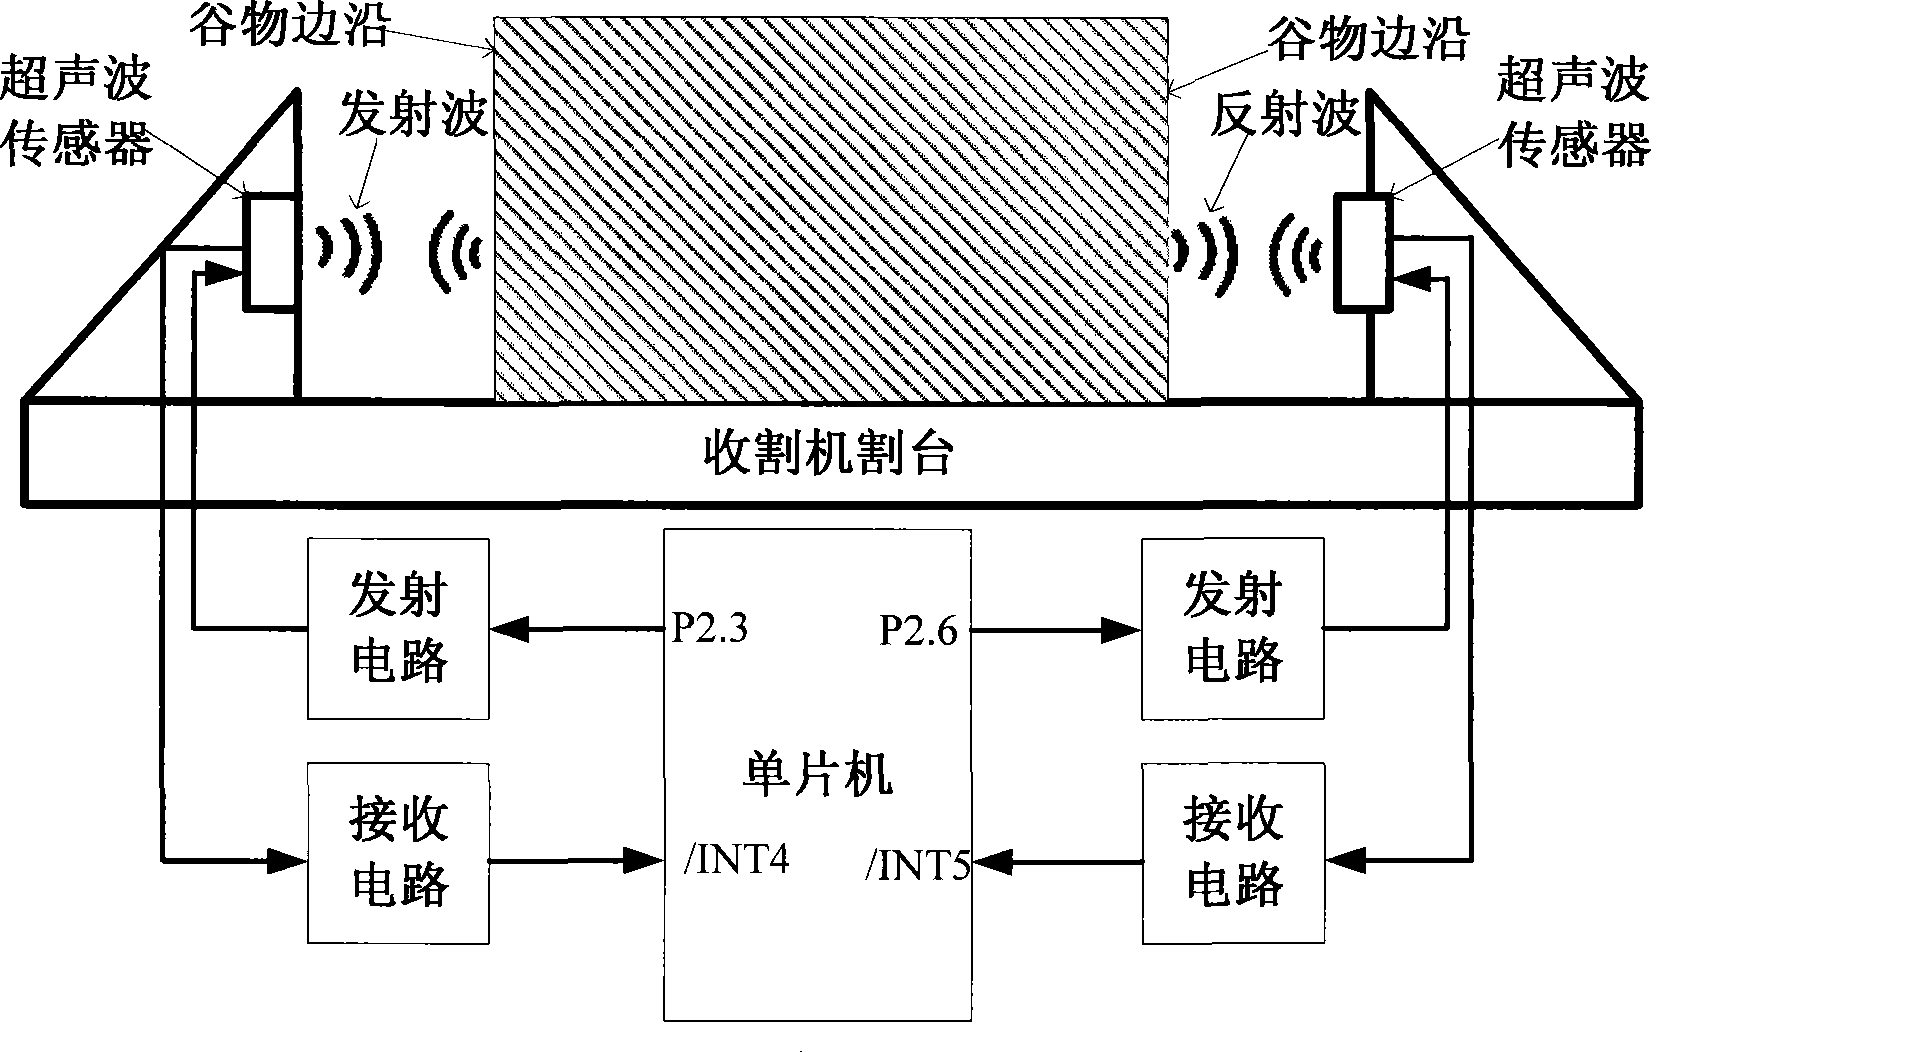 Reaping area measurement and billing system and method